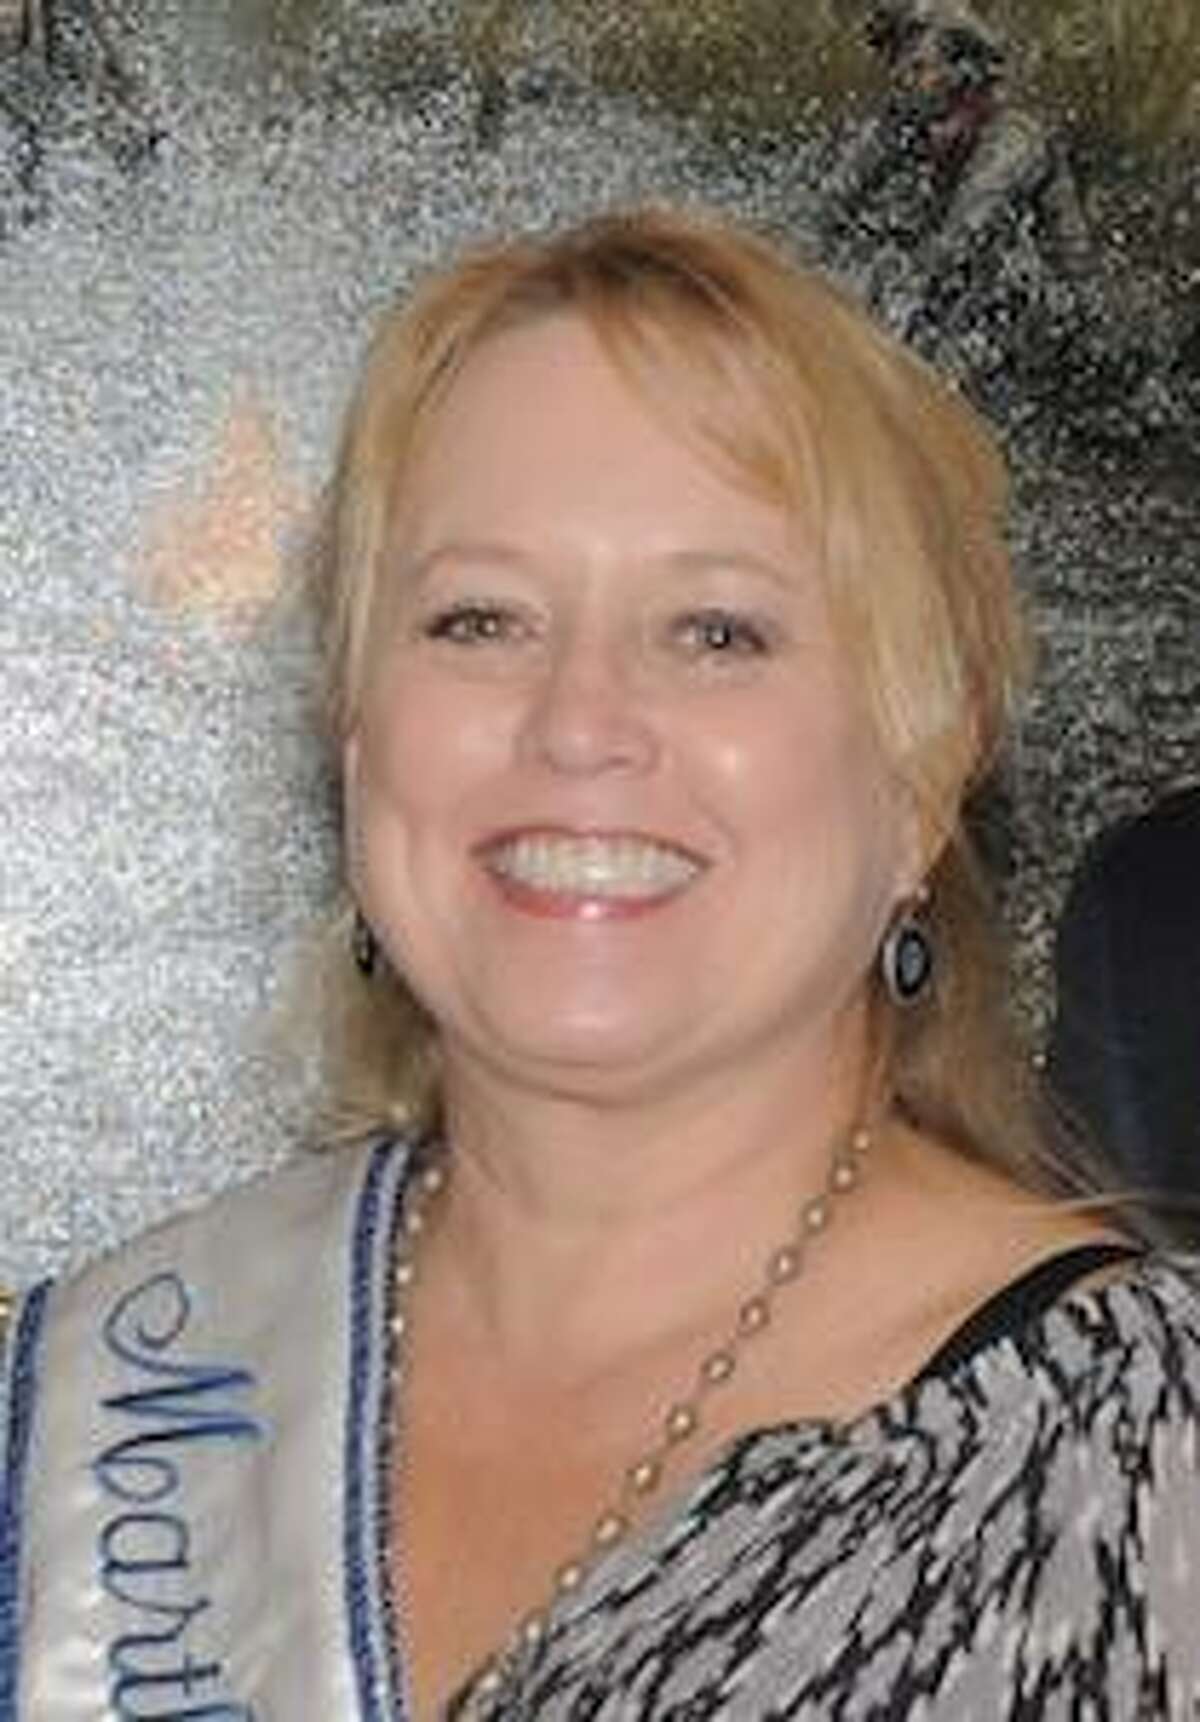 Tami Summers is pictured in a file photo.